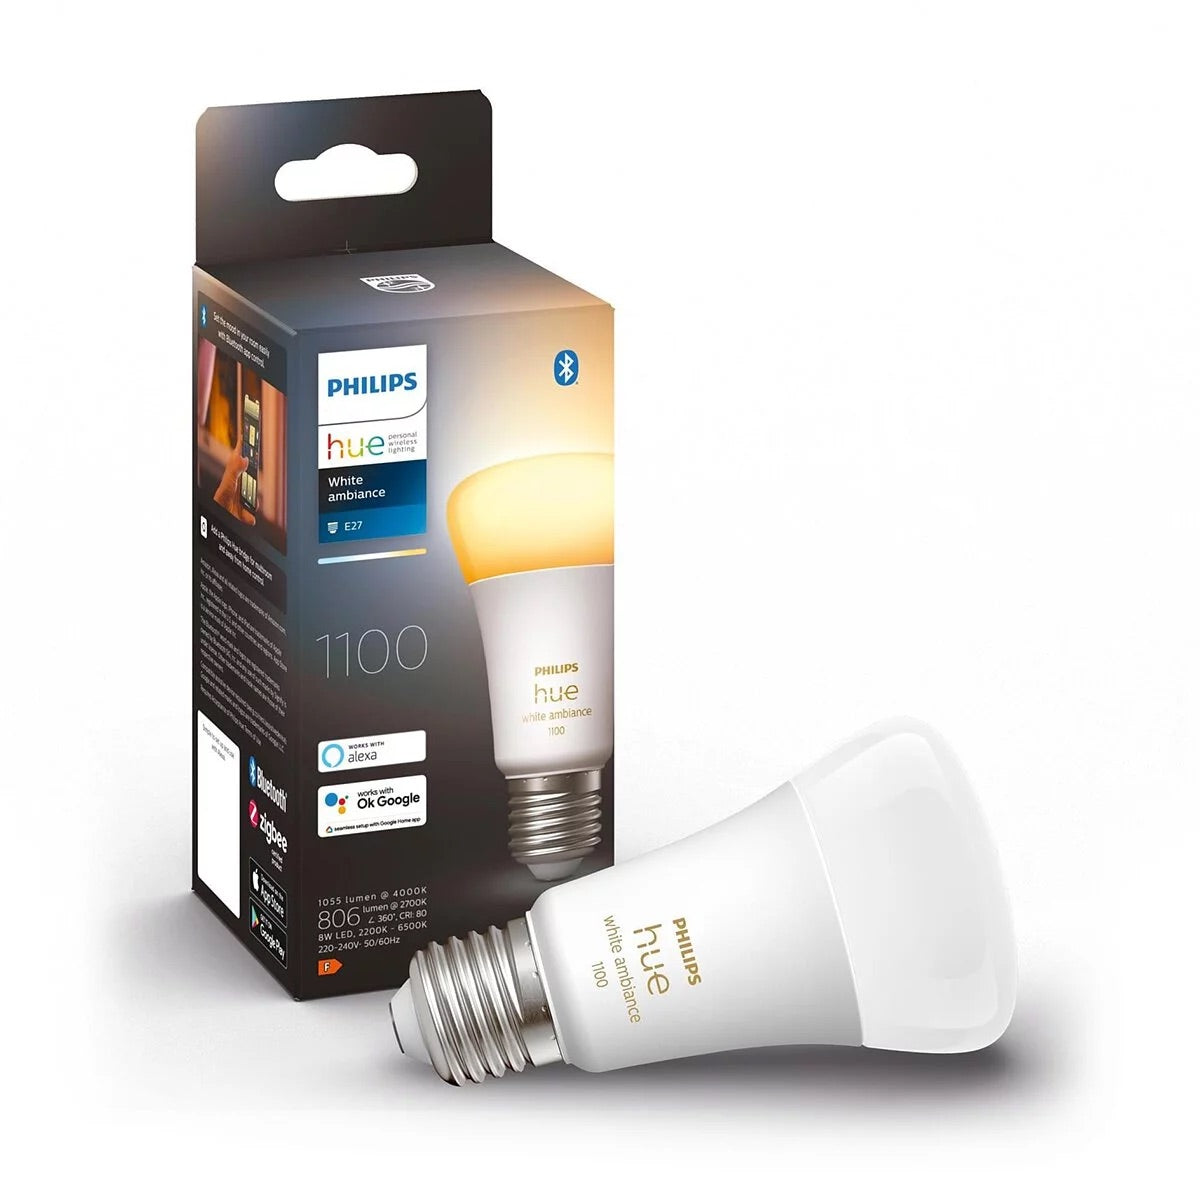 Hue White And Color Ambiance 5.7W GU10 1-Pack BT, Sleep Lights